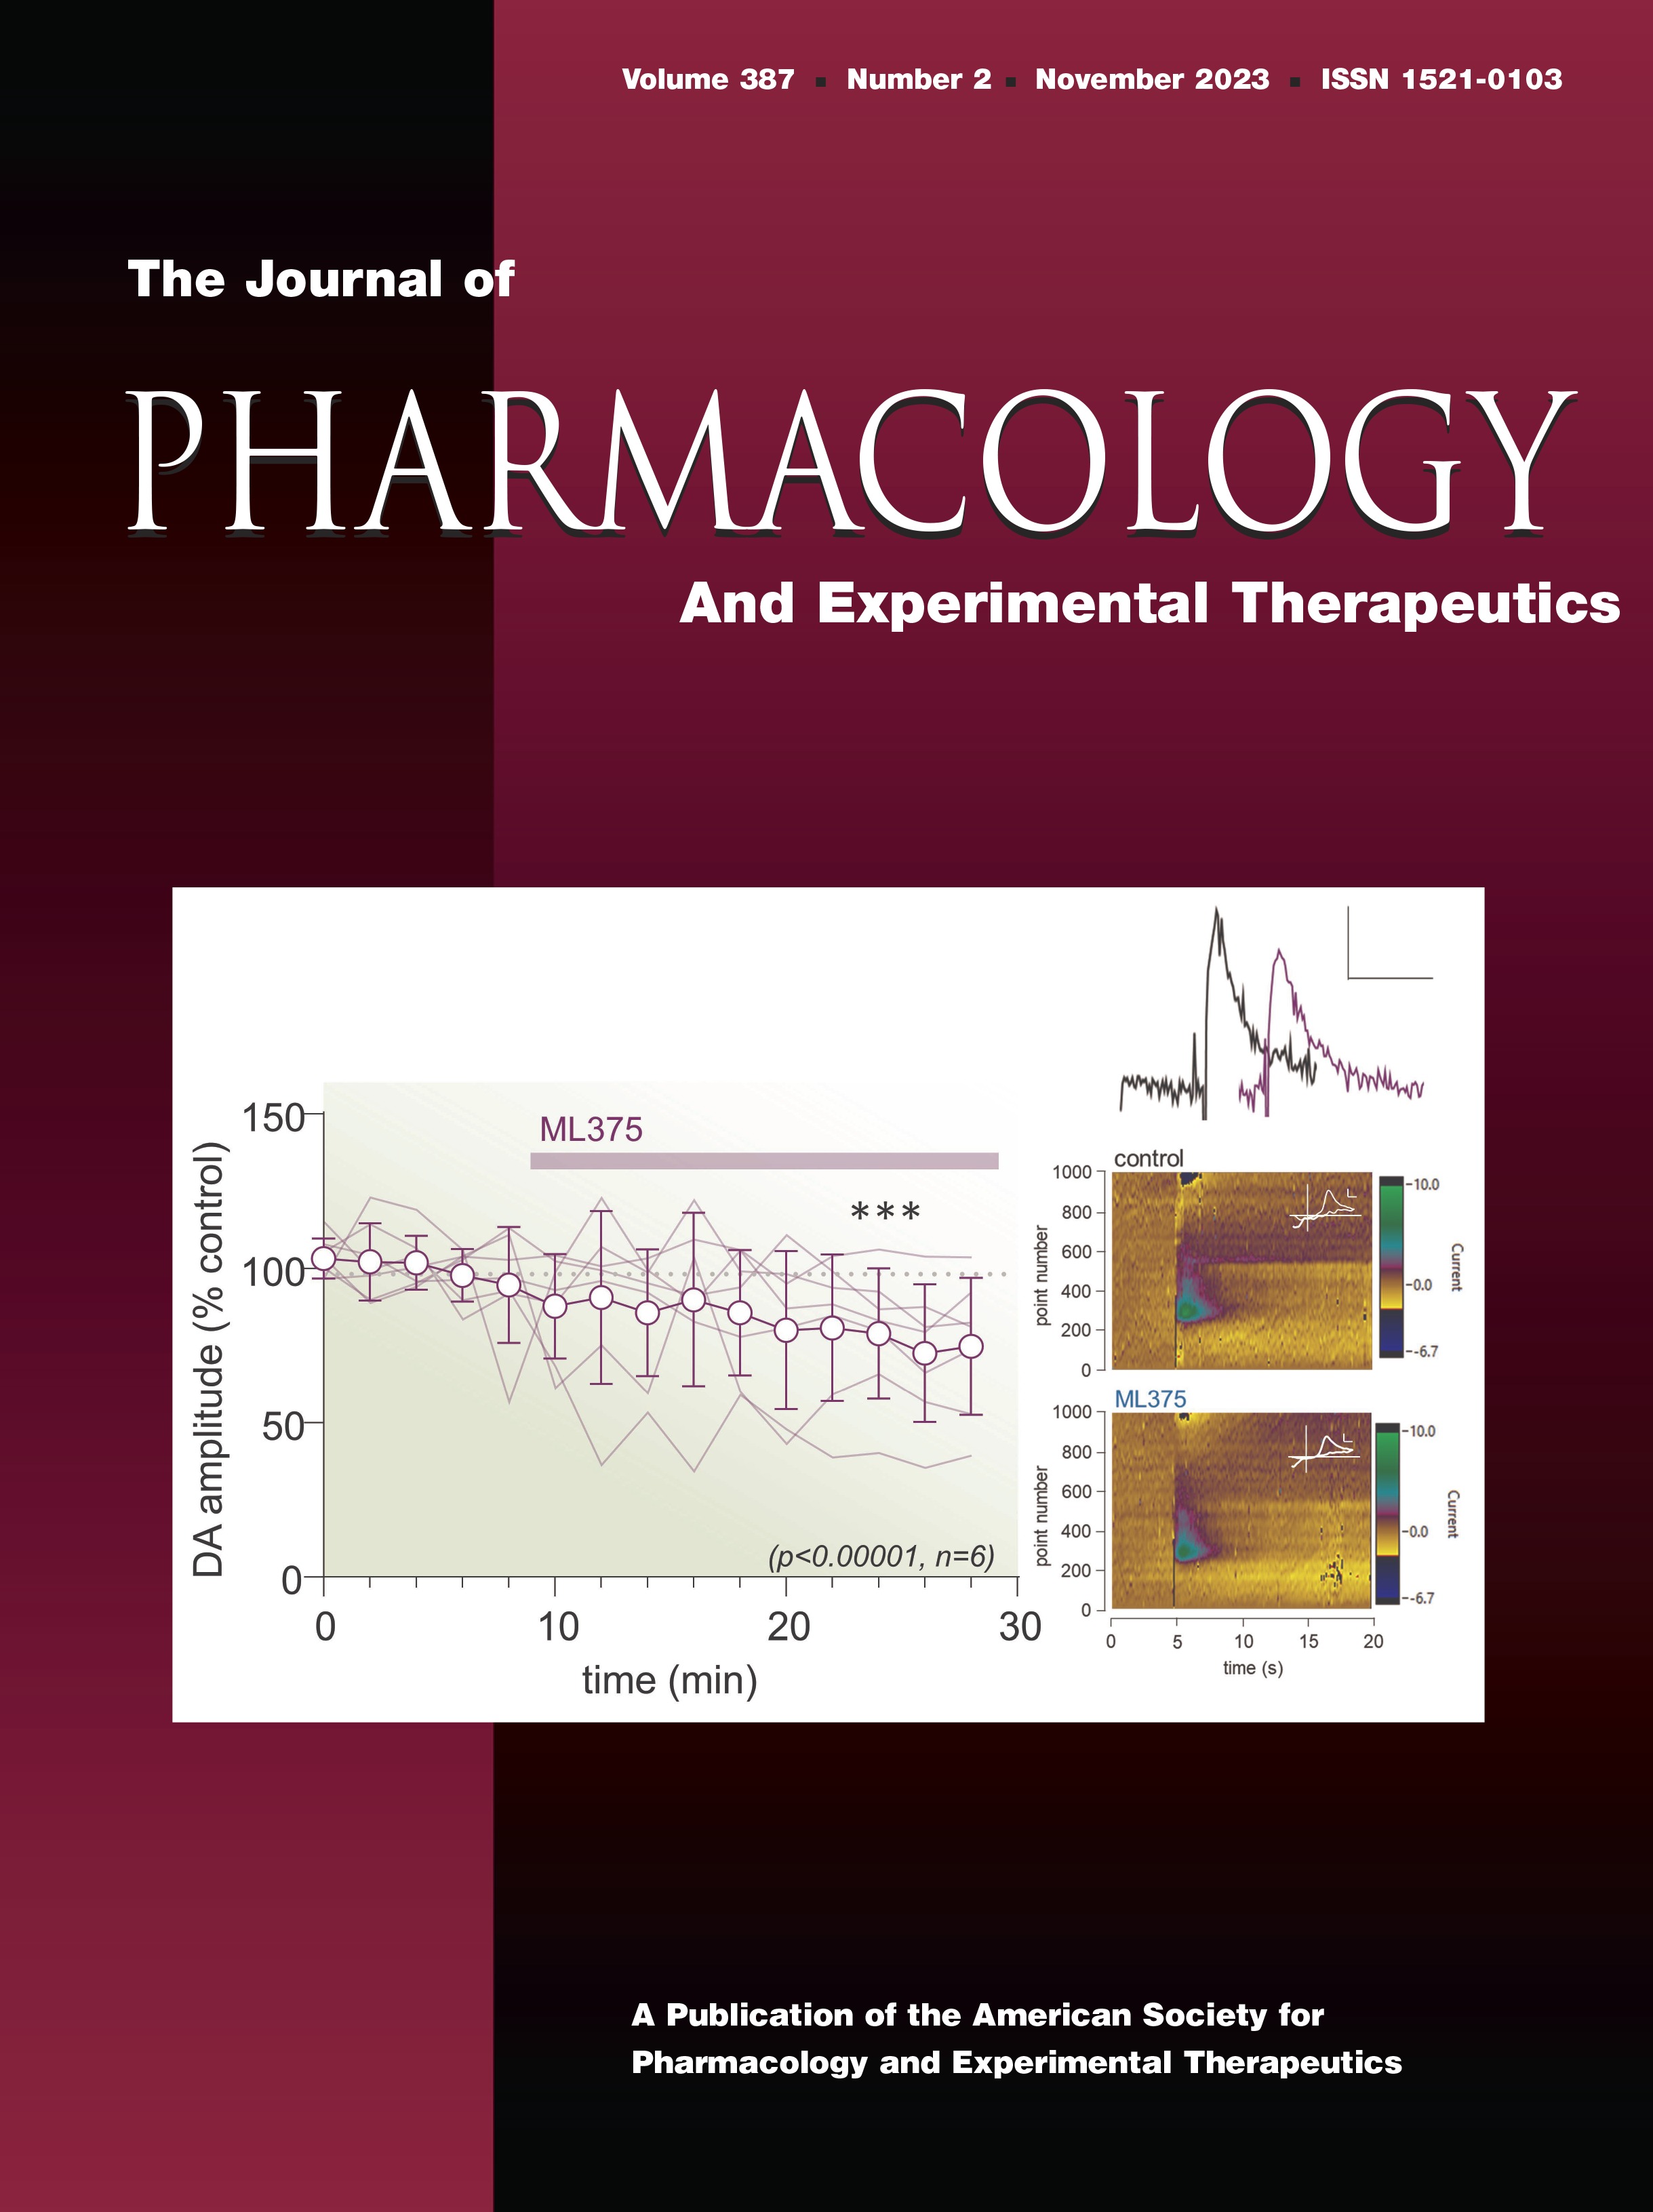 Quantitative Prediction of OATP-Mediated Disposition and Biliary Clearance Using Human Liver Chimeric Mice [Drug Discovery and Translational Medicine]